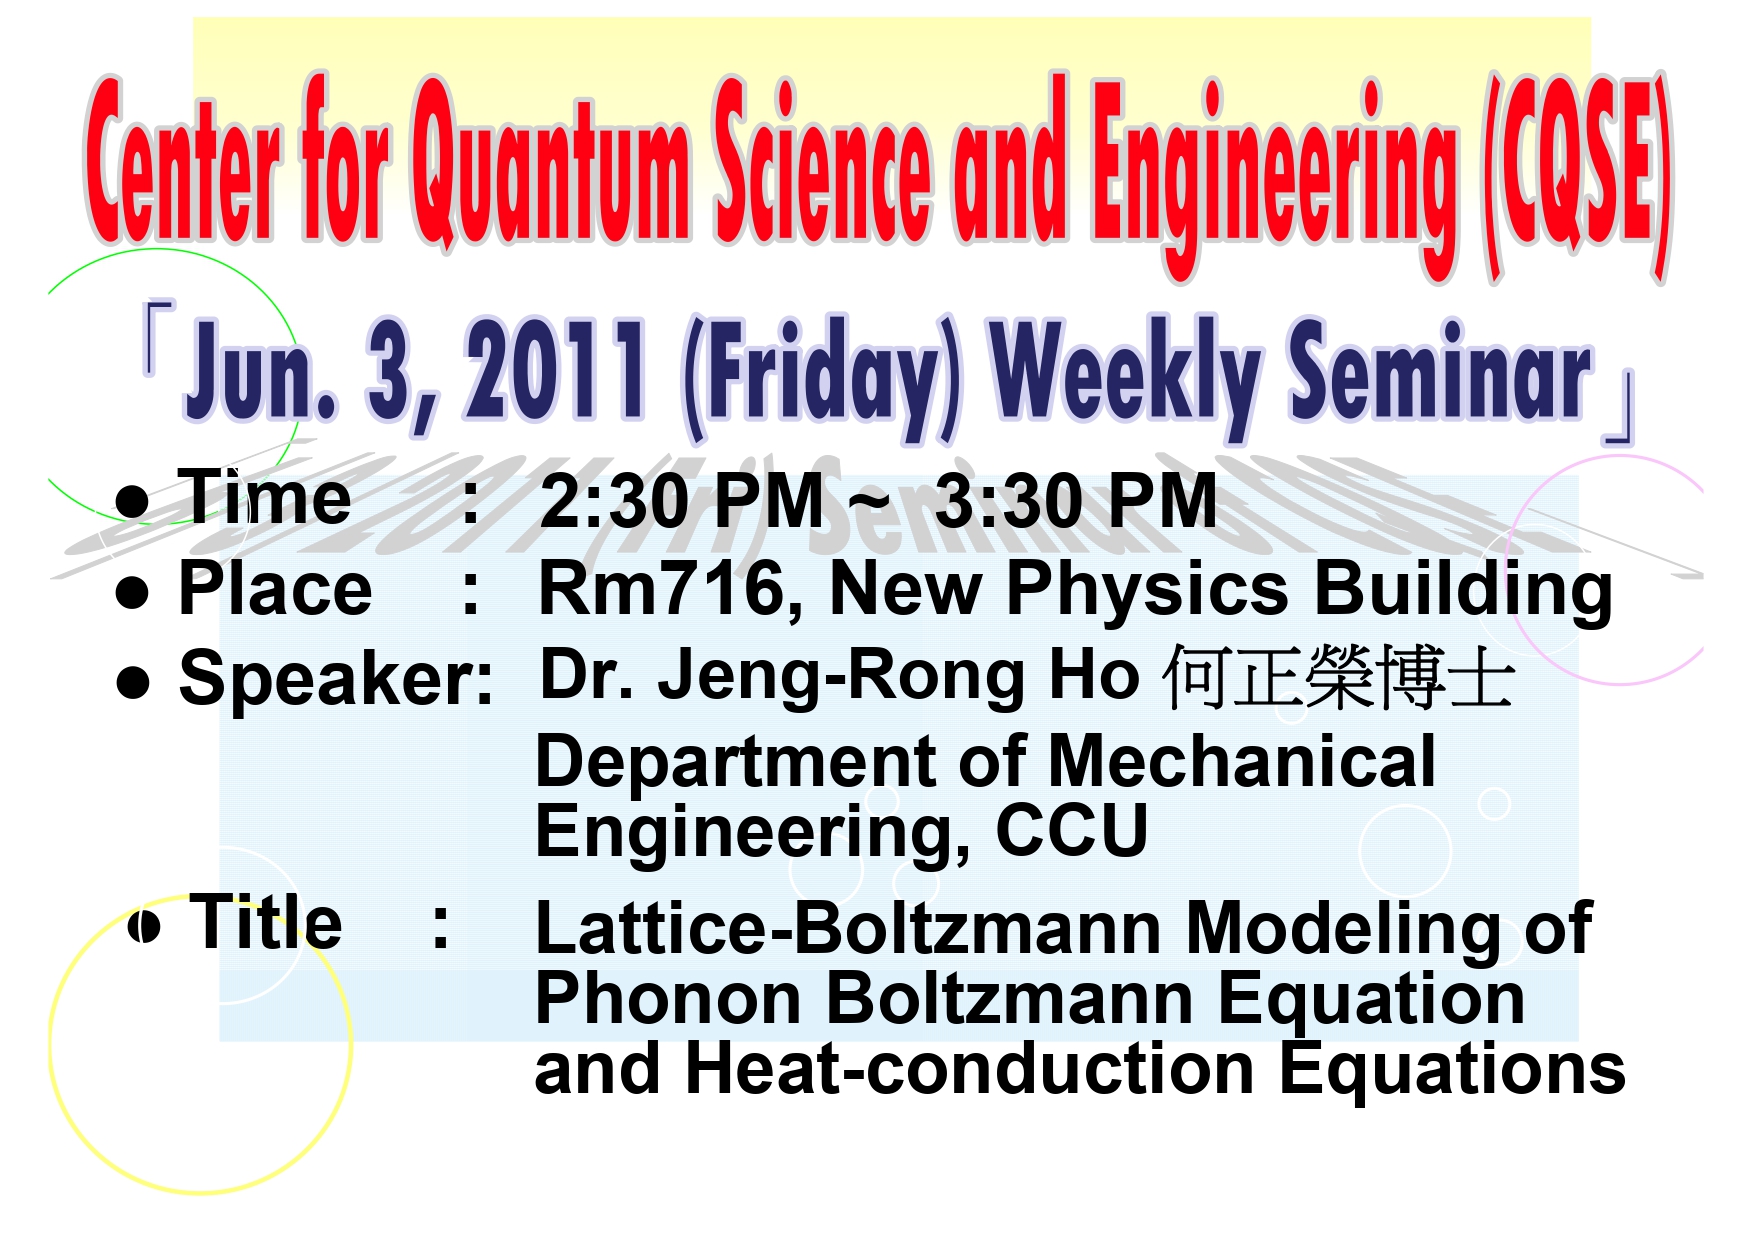 [CANCEL] Seminar of Center for Quantum Science and Engineering (CQSE)